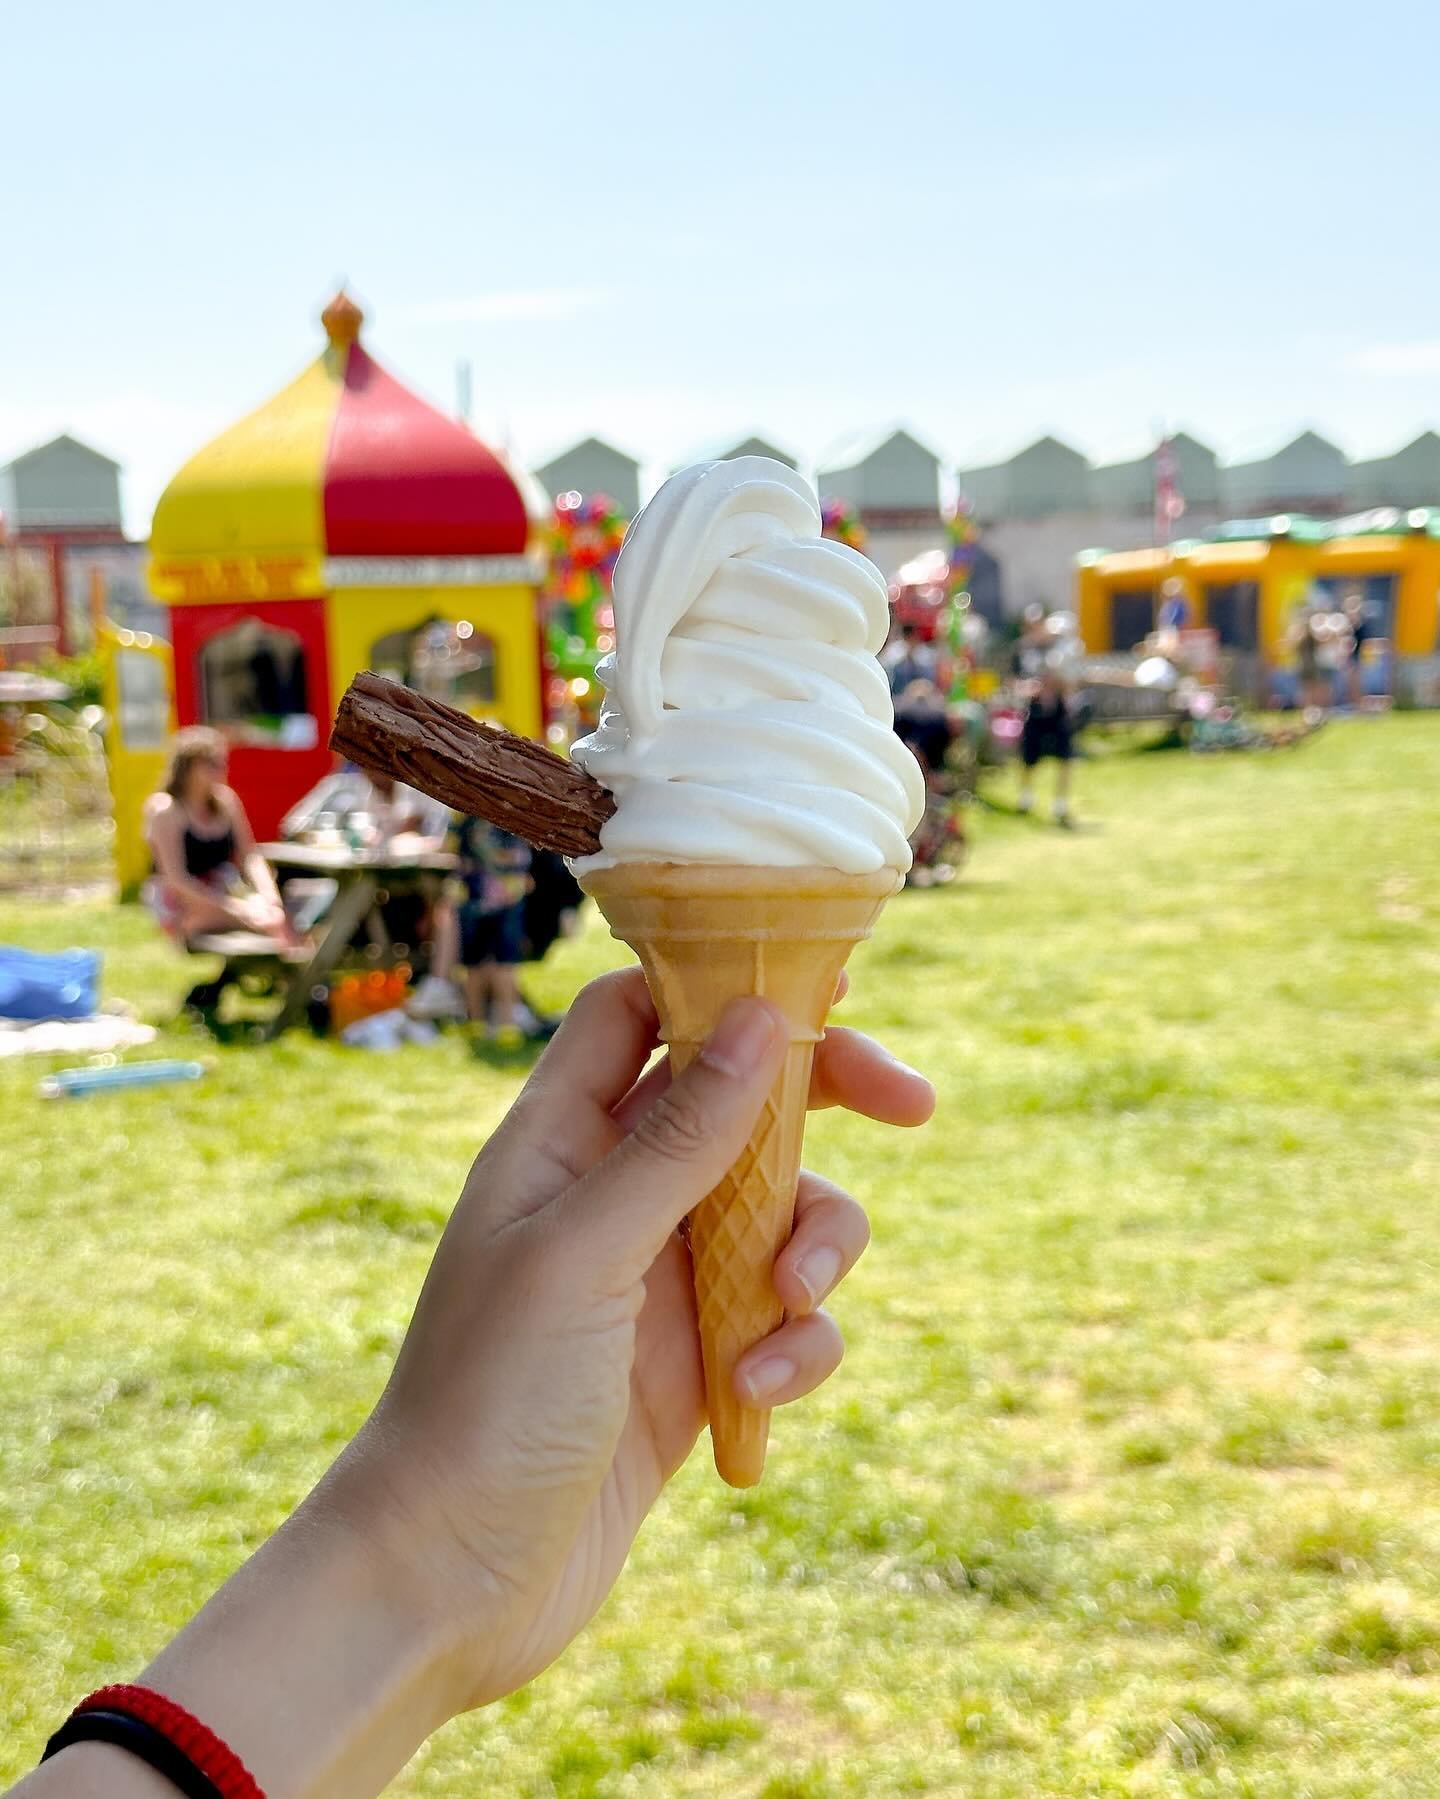 What #seasideliving is all about!! Because when the sun comes out, it&rsquo;s #alfrescodining, #seasidestrolls, #mrwhippyicecream, more #mrwhippy, #cider on the seafront and soaking up the sun! Ended the day with #chinesetakeaway and peeps at Mr. Sco